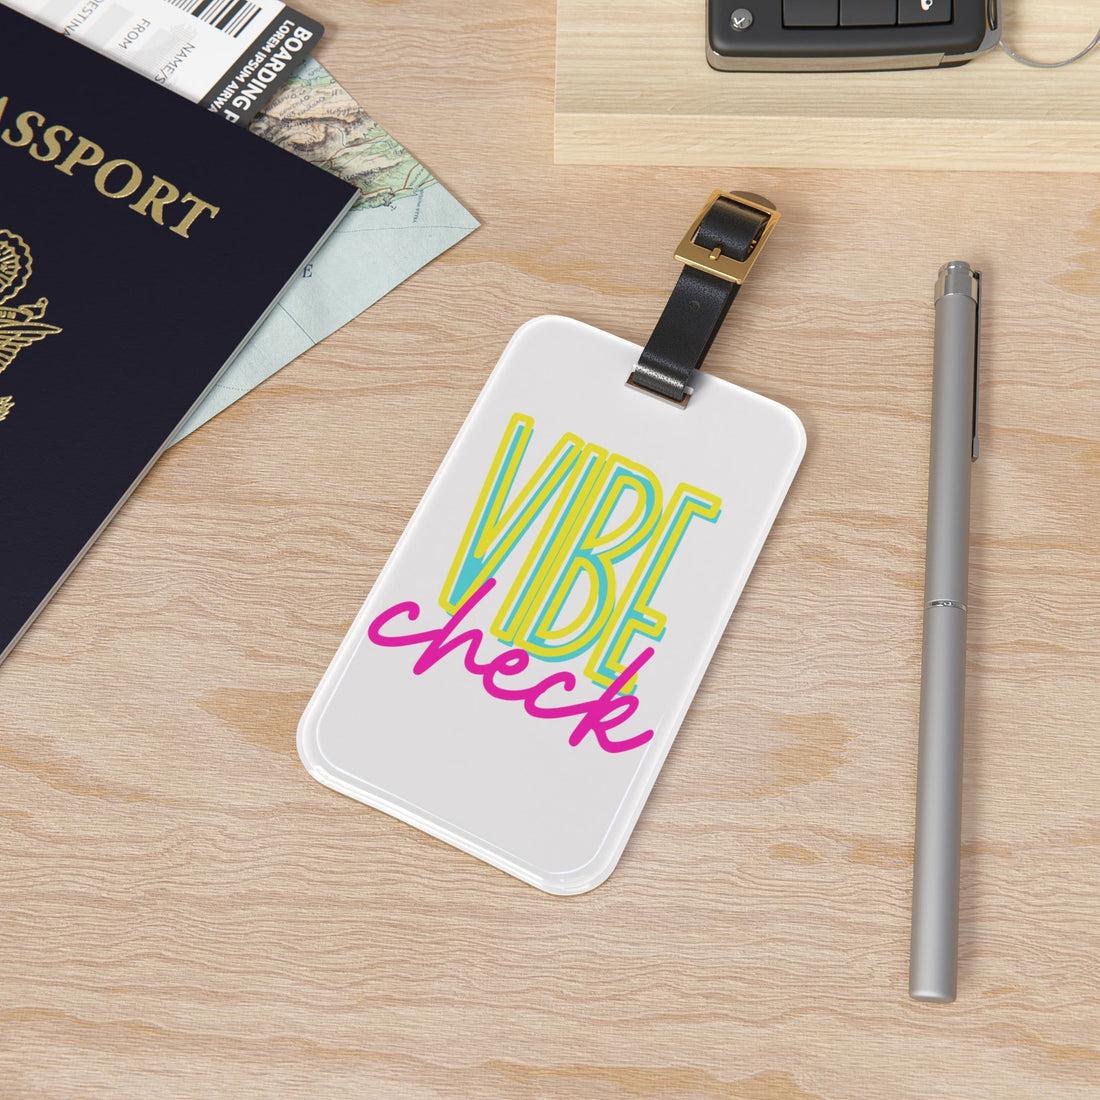 Vibe Check Luggage Tag - Accessories - Positively Sassy - Vibe Check Luggage Tag